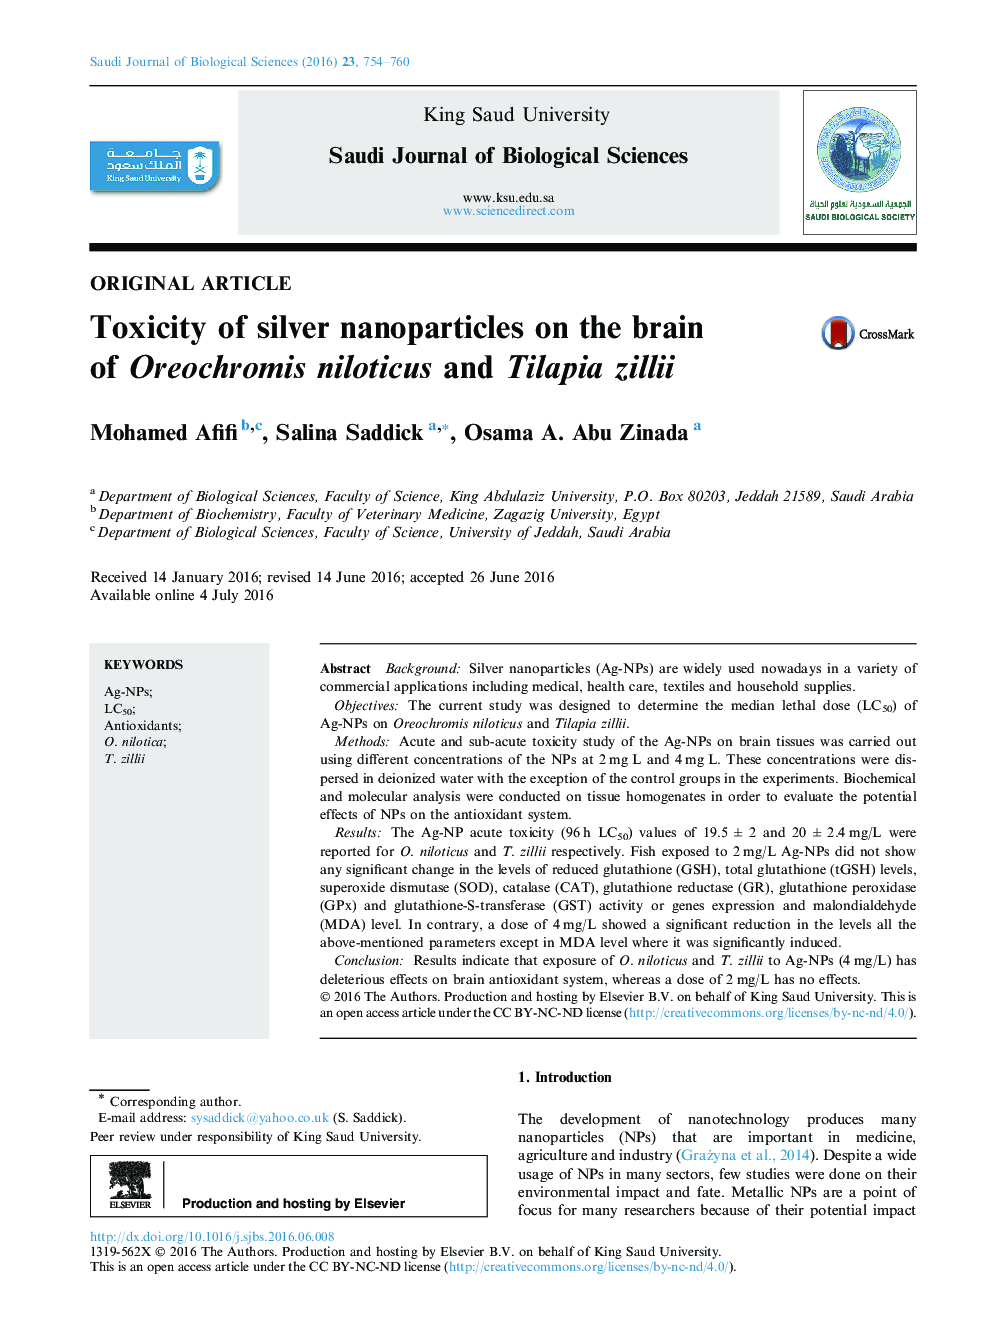 Original articleToxicity of silver nanoparticles on the brain of Oreochromis niloticus and Tilapia zillii